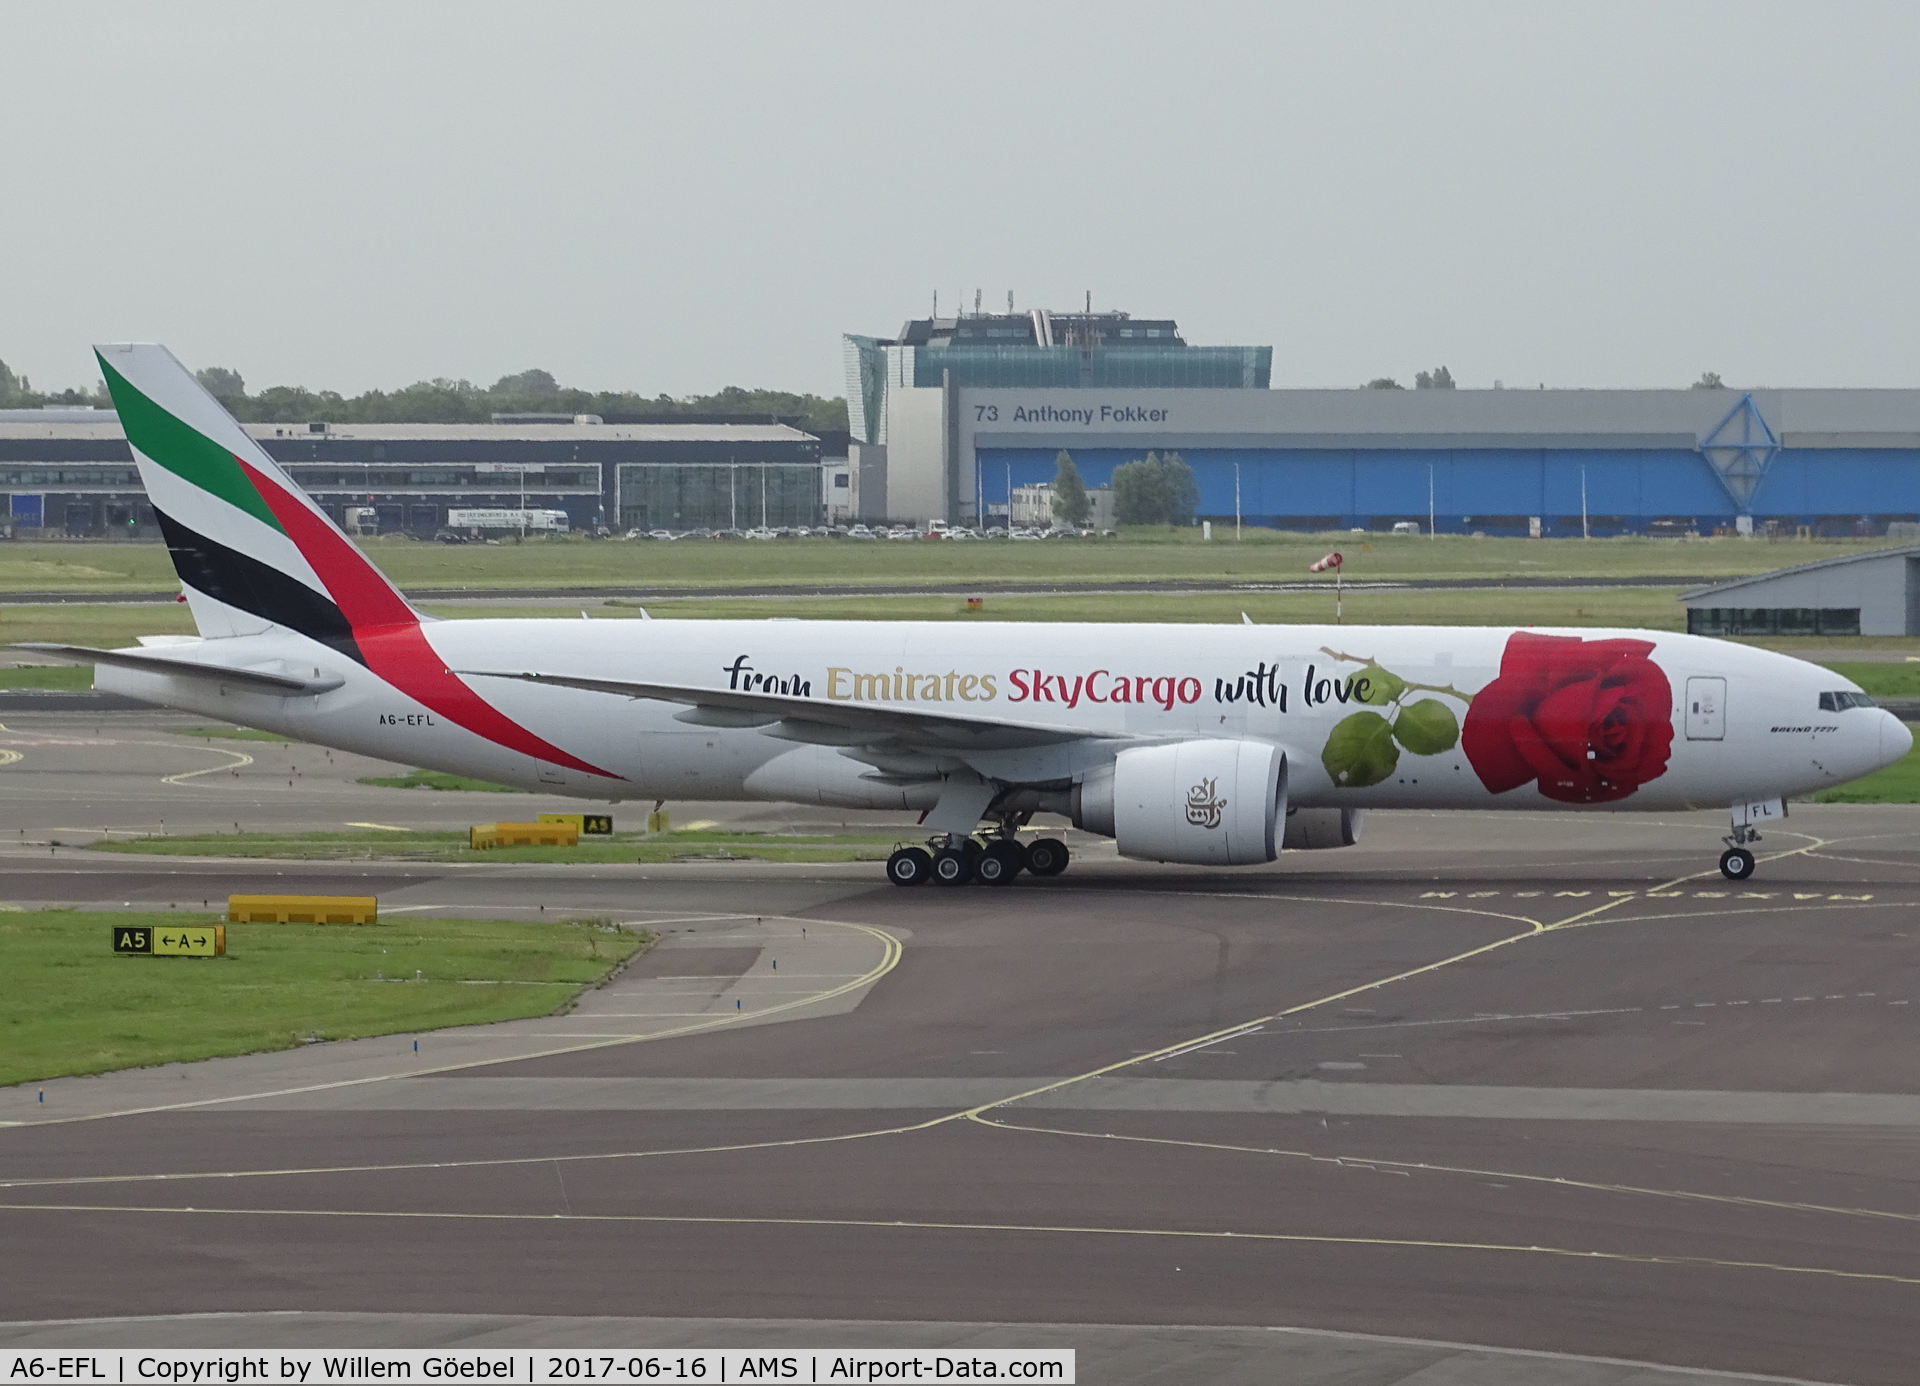 A6-EFL, 2013 Boeing 777-F1H C/N 42230, Taxi to the runway of Schiphol Airport